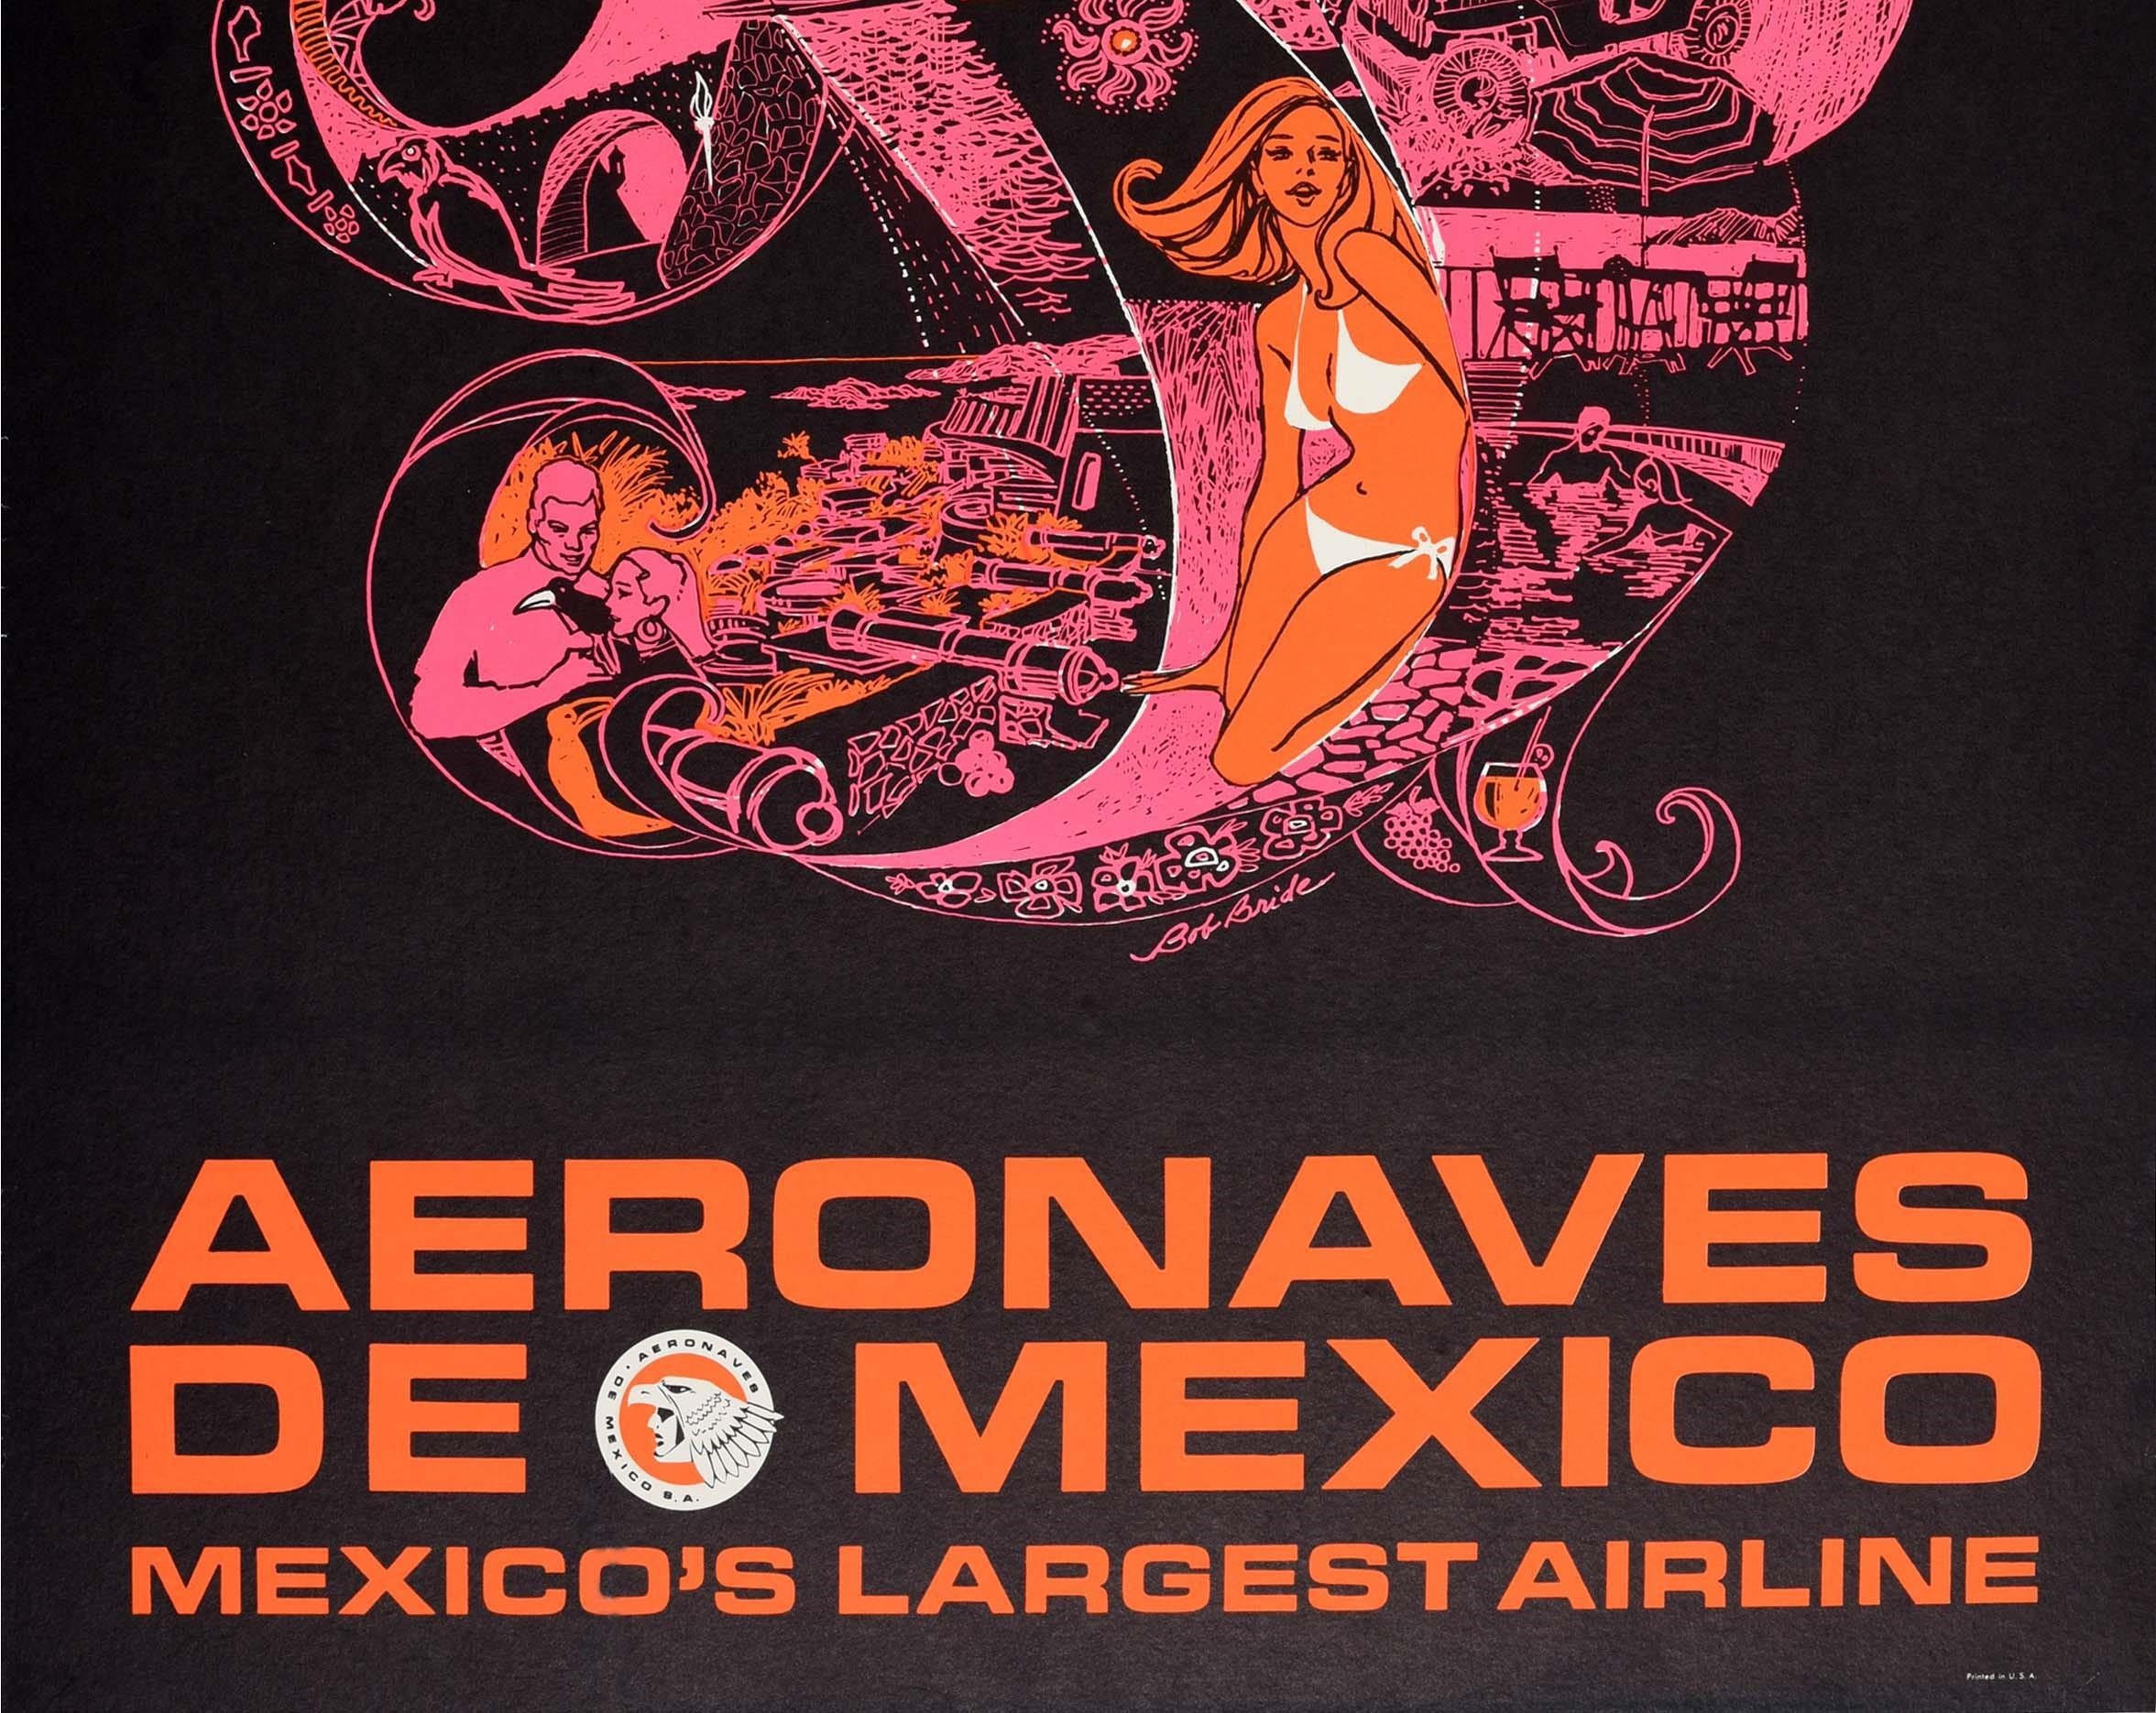 Original Vintage Airline Travel Poster Acapulco Aeronaves De Mexico Psychedelic im Zustand „Gut“ im Angebot in London, GB